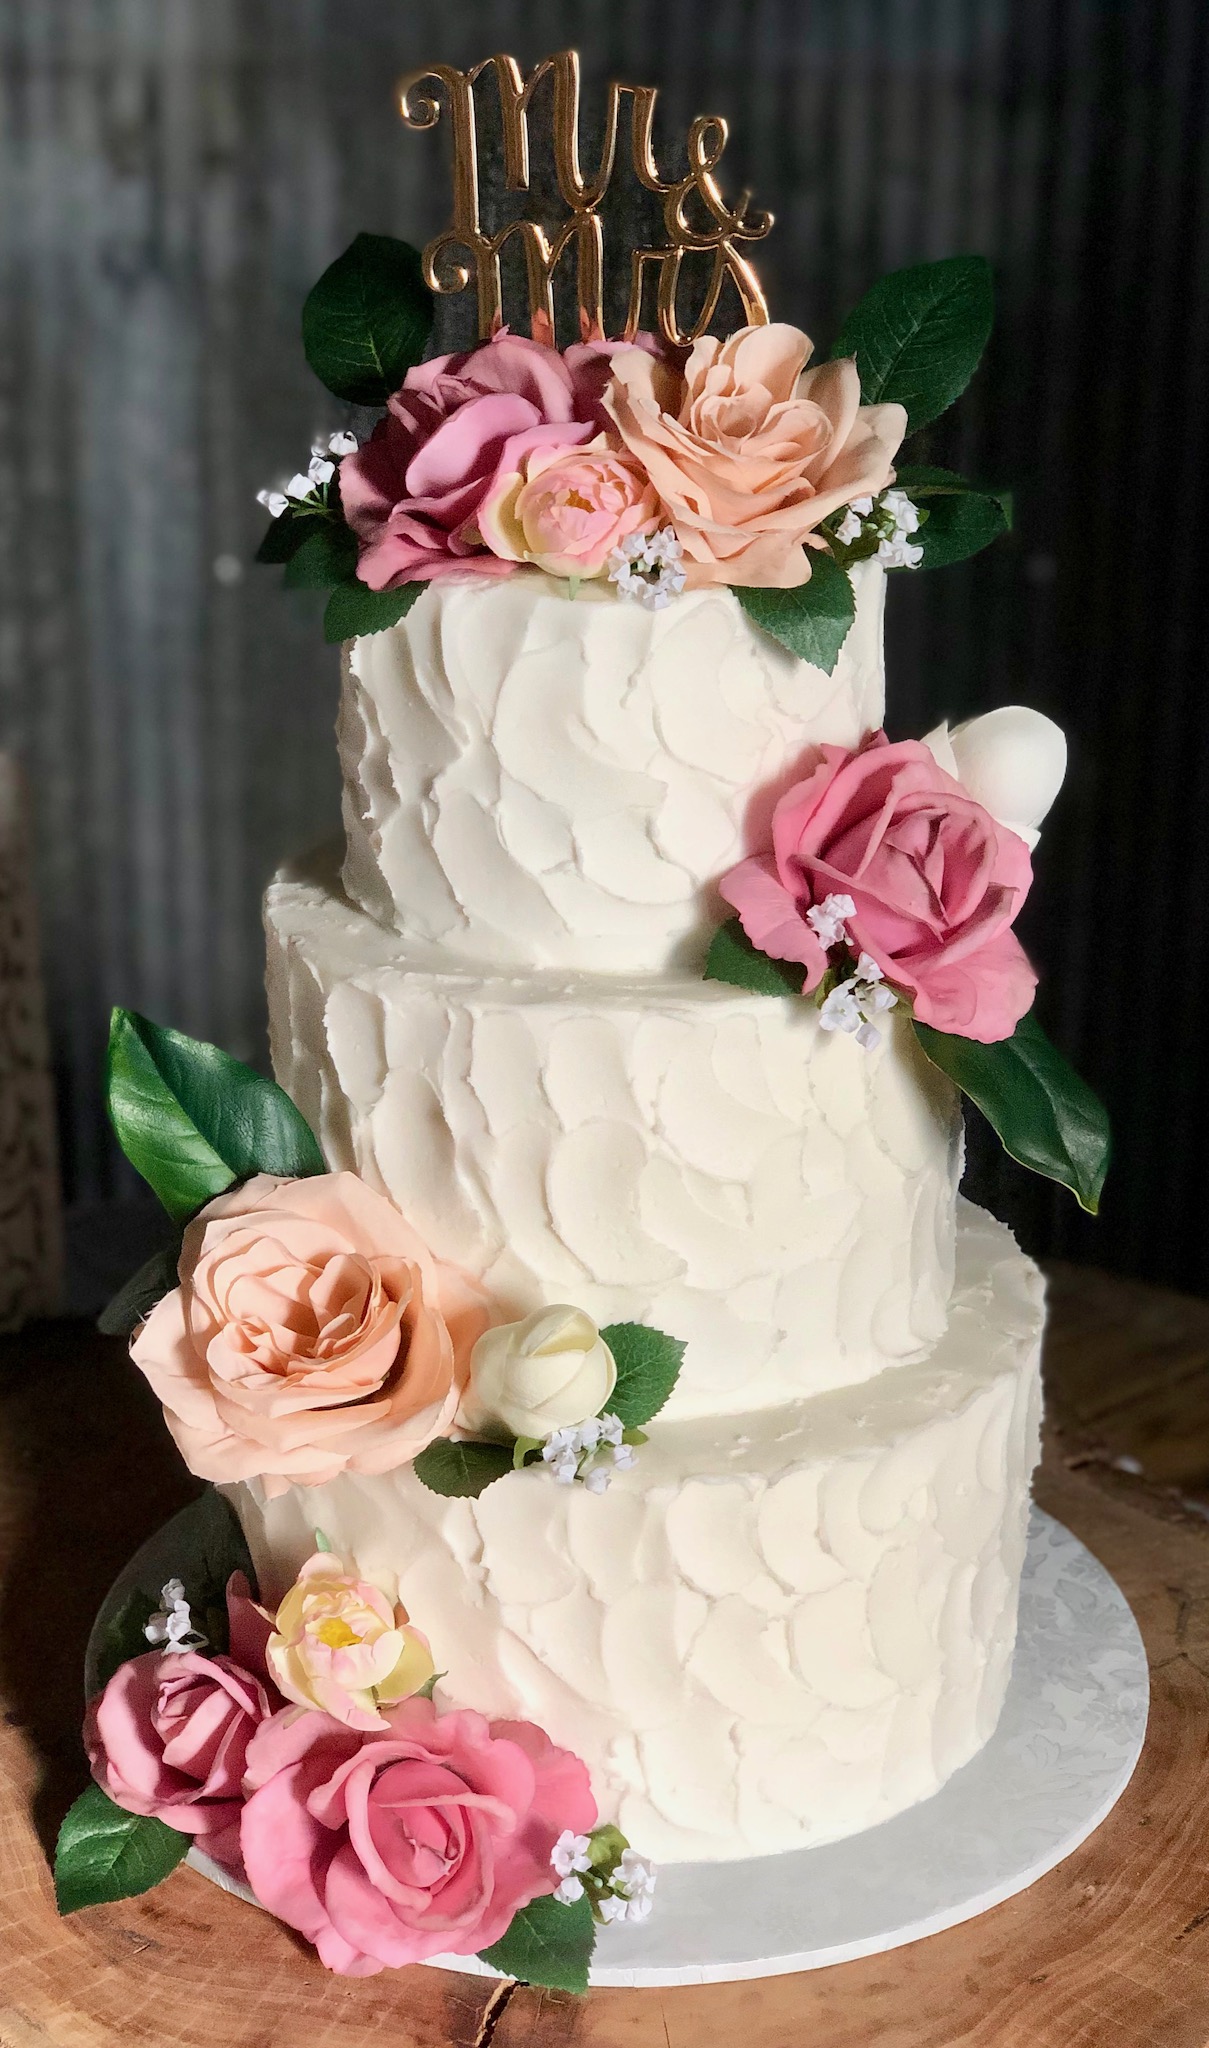 3 Tier while faceted wedding cake with roses as decoration at Memphis wedding.